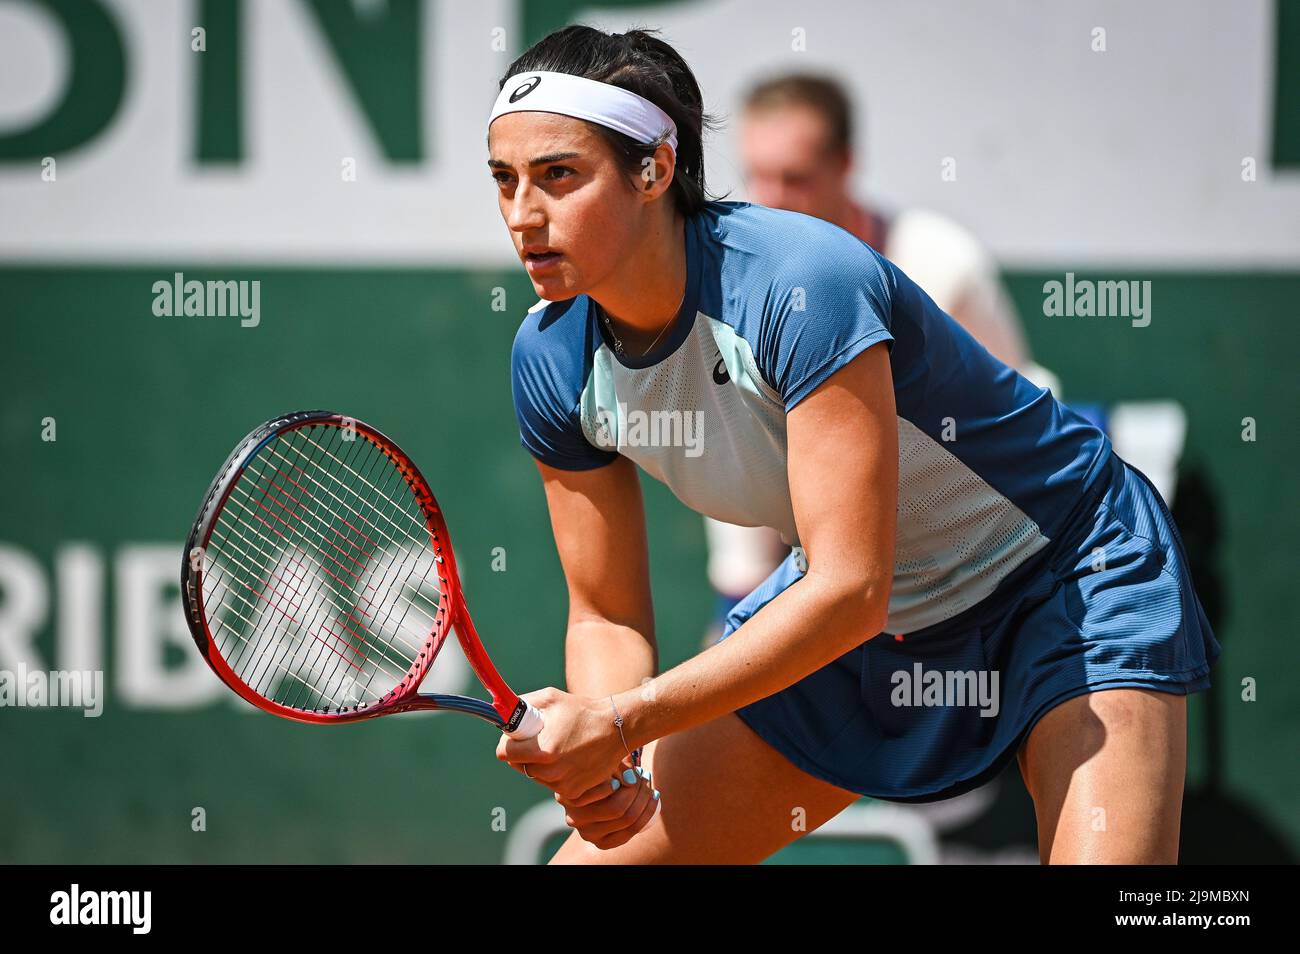 Paris, France - May 24, 2022, Caroline GARCIA of France during the Day  three of Roland-Garros 2022, French Open 2022, Grand Slam tennis tournament  on May 24, 2022 at Roland-Garros stadium in